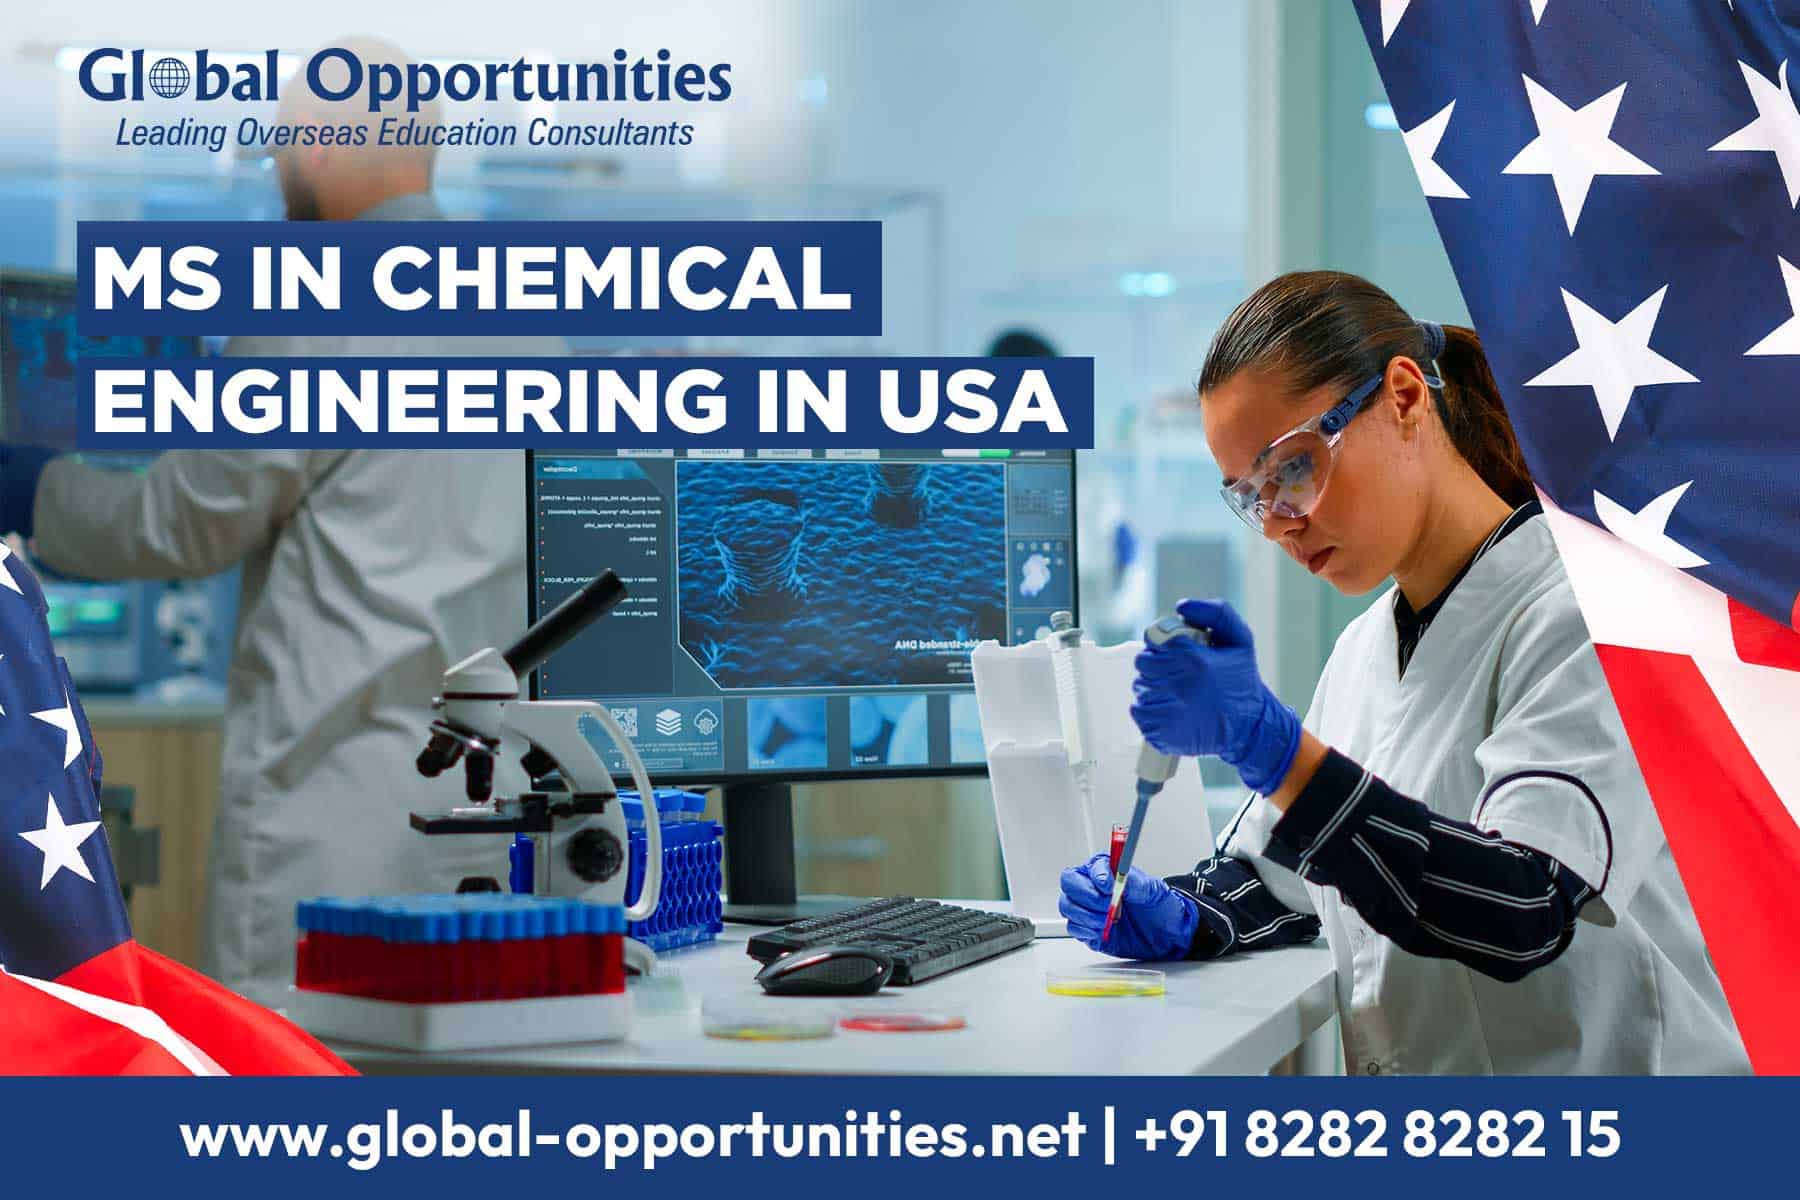 MS in Chemical Engineering in USA